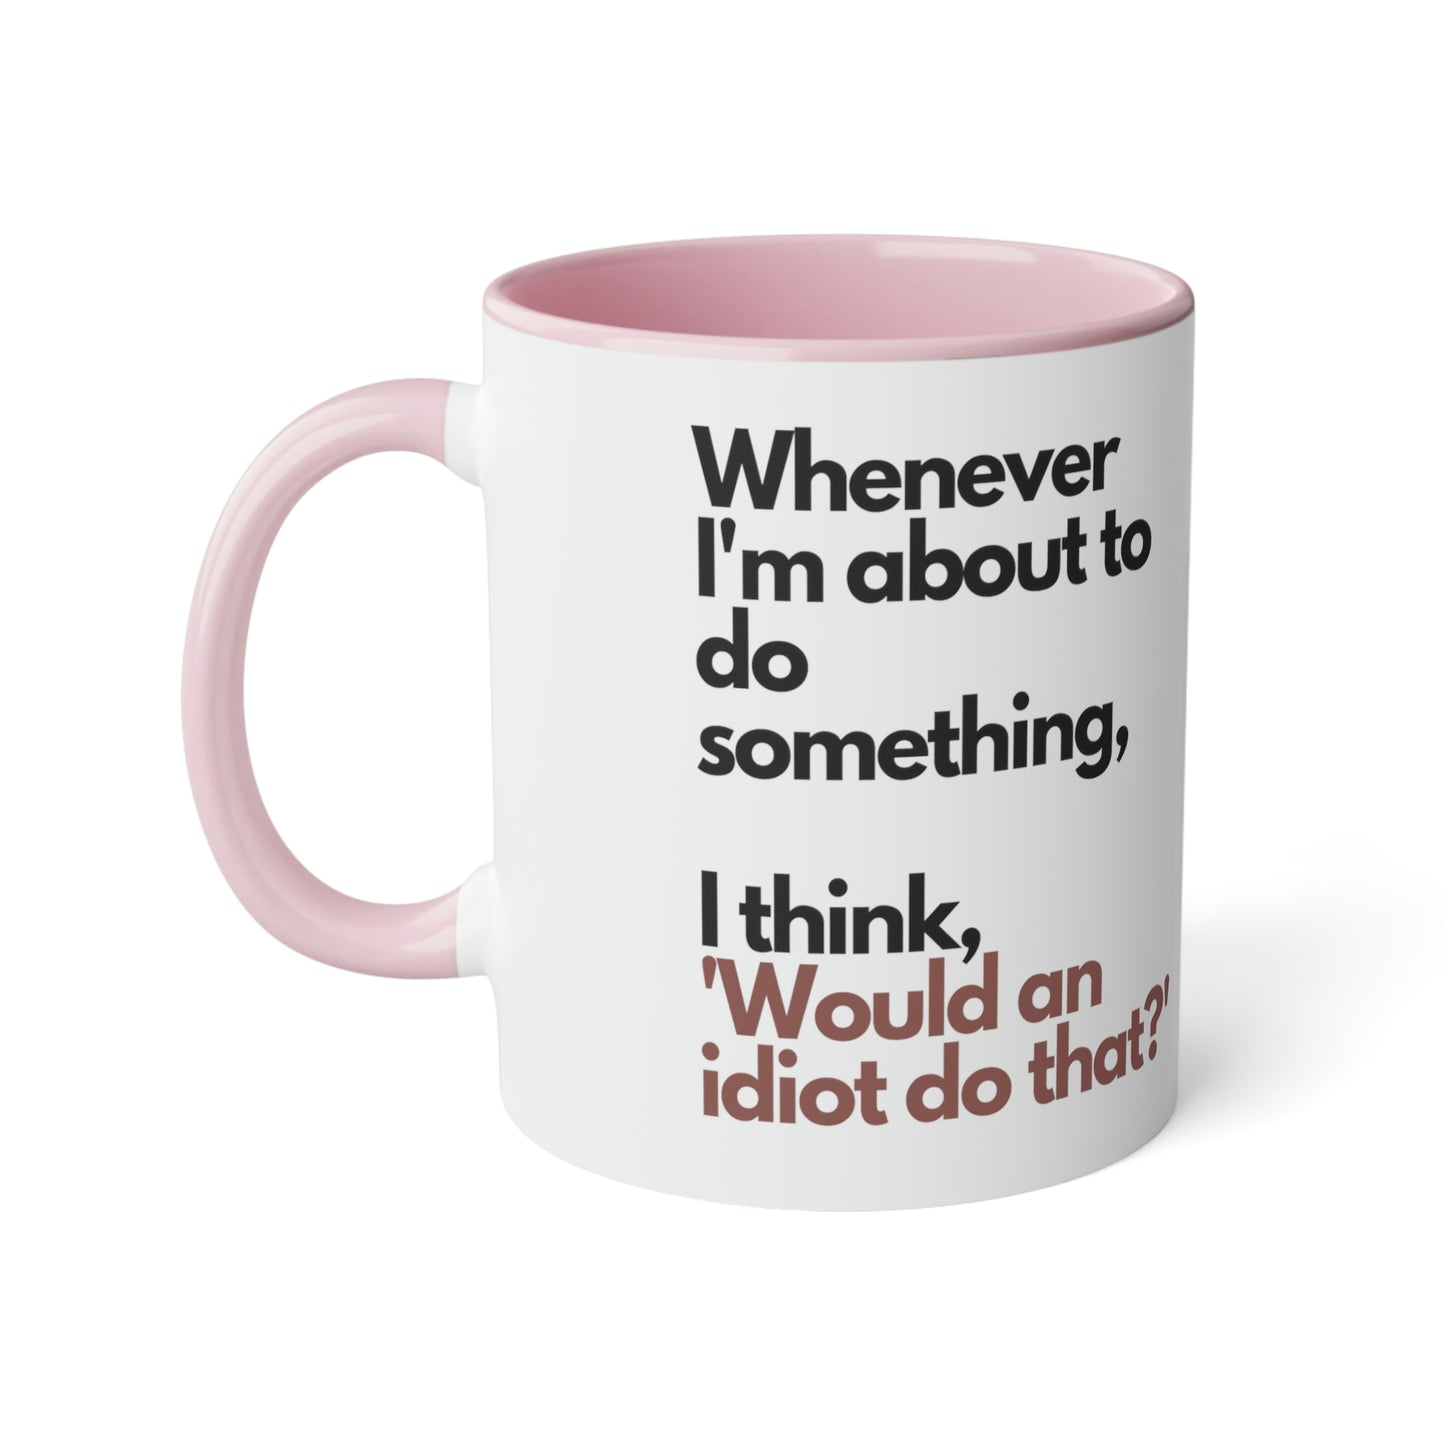 Meme Mug Dunder Mifflin workplace comedy - Whenever I'm about to do something, I think, 'Would an idiot do that?